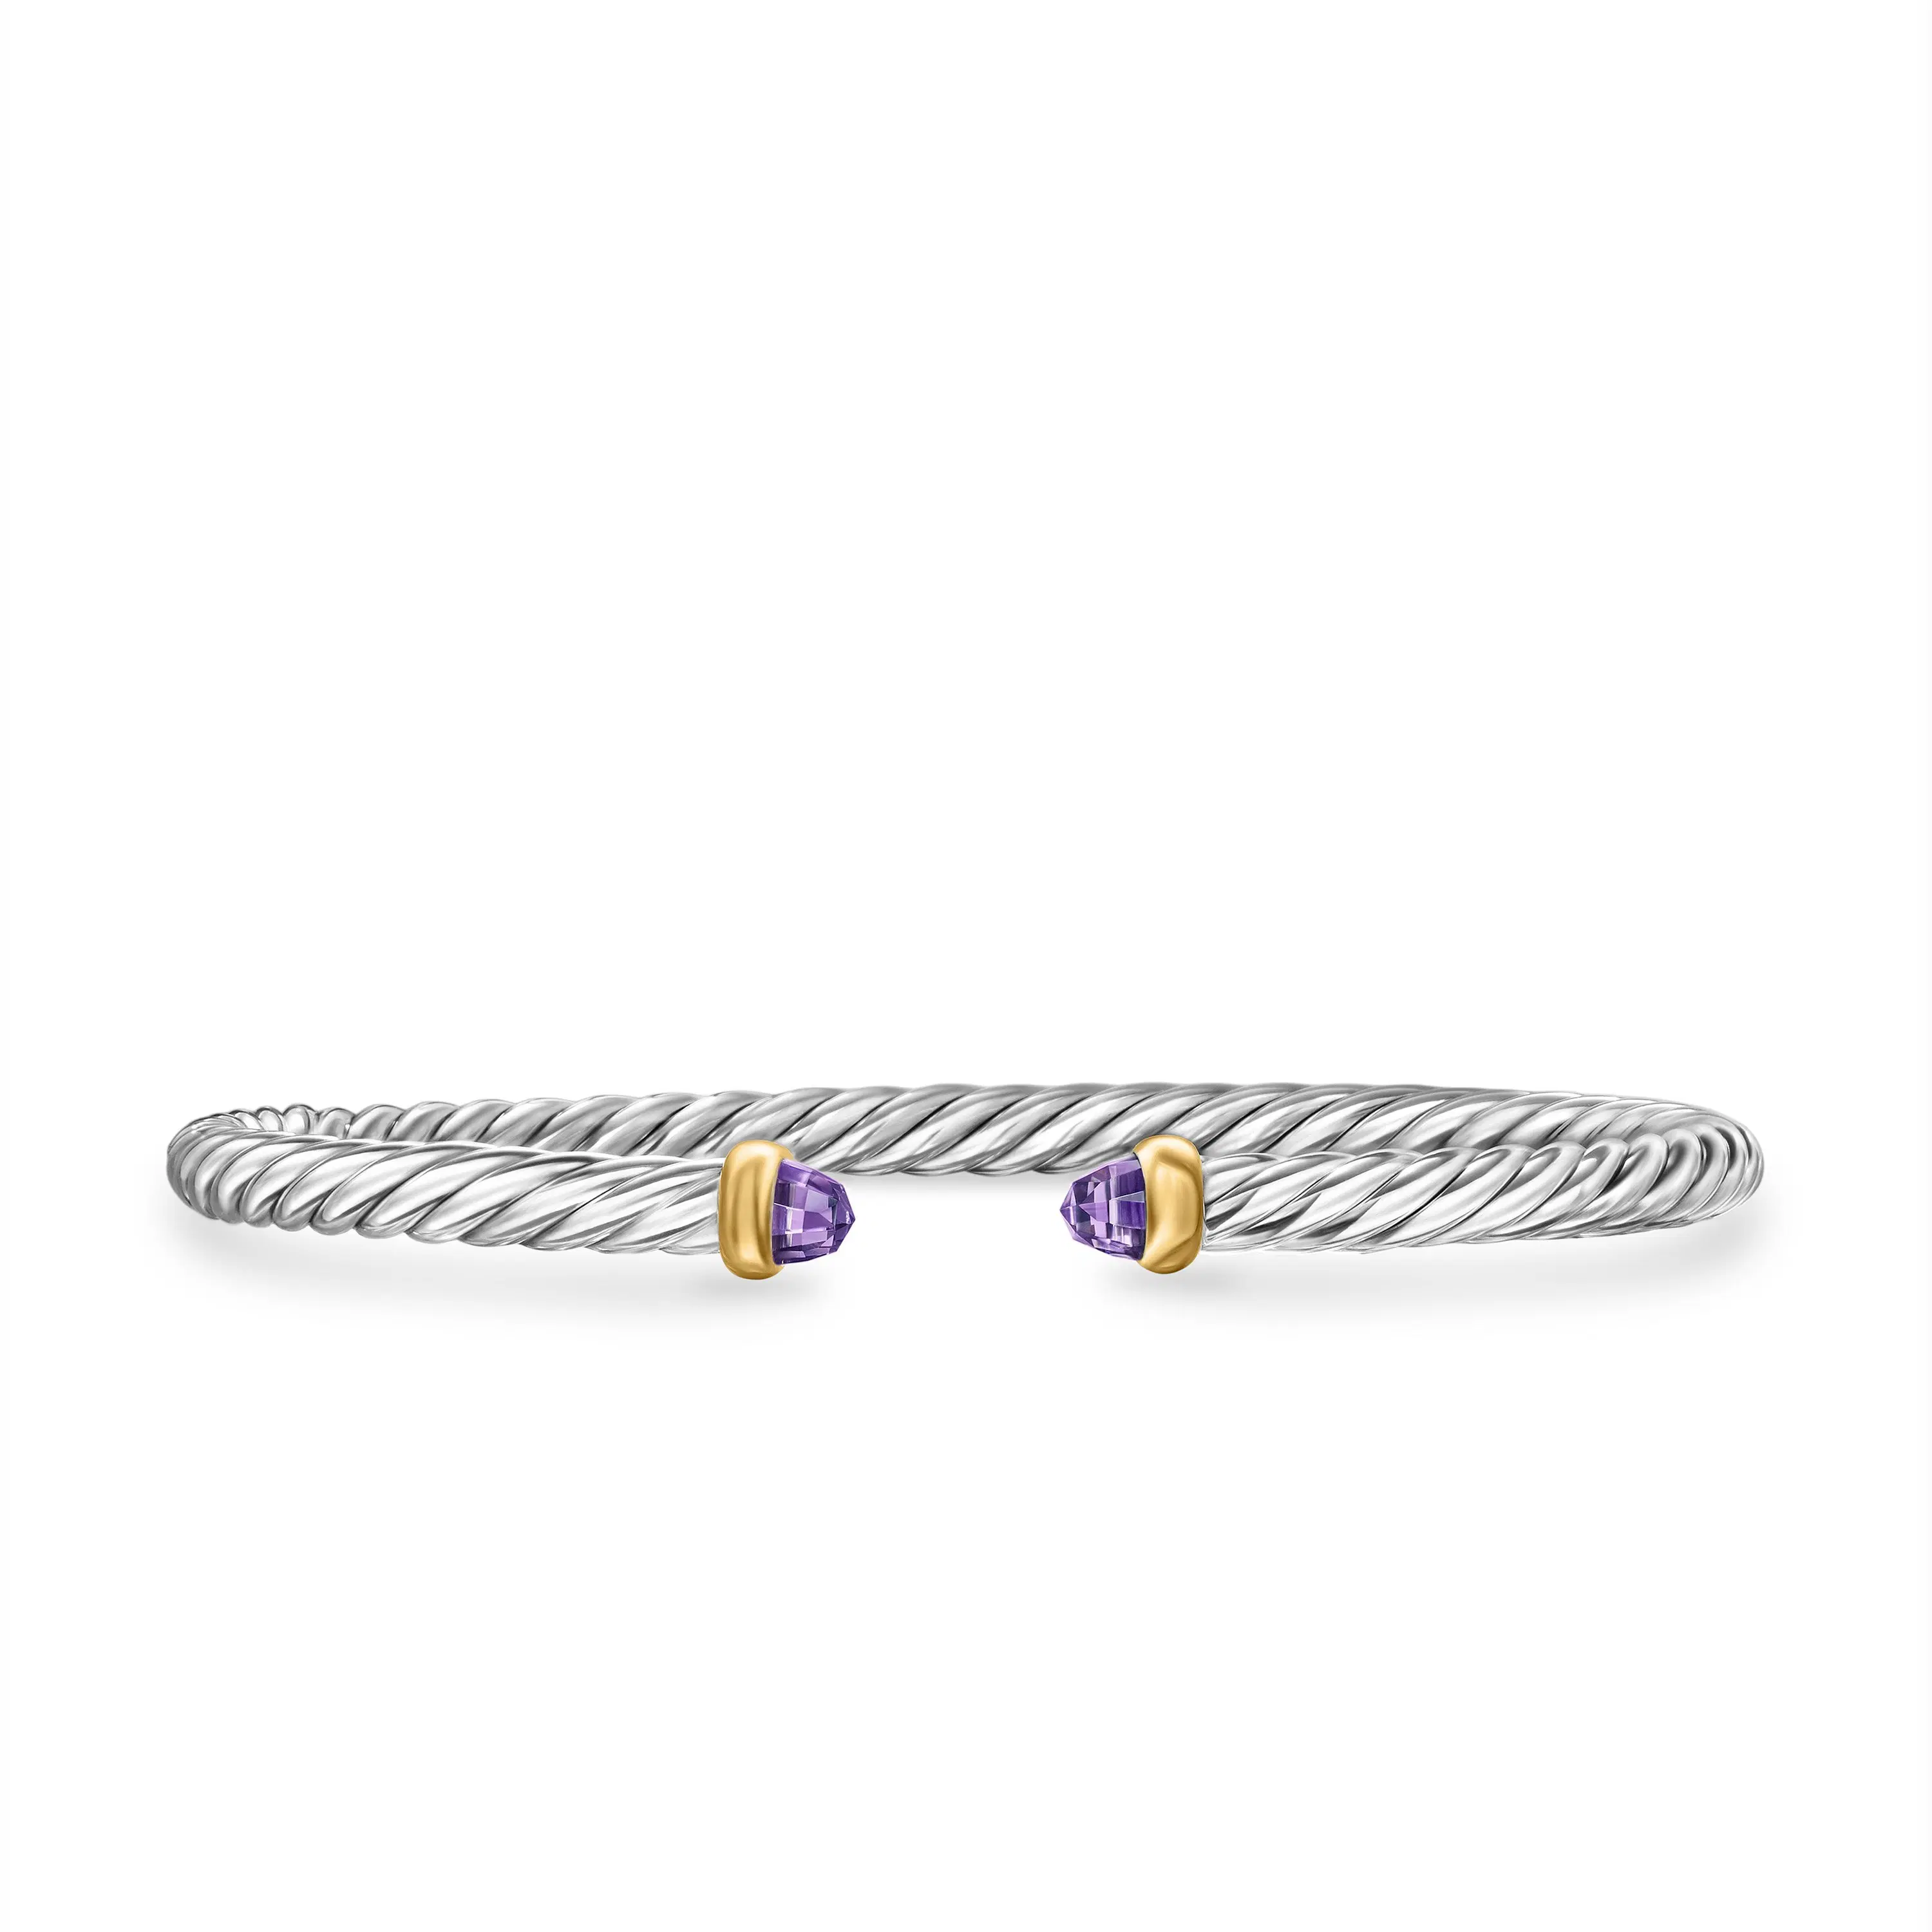 David Yurman Cable Flex Sterling Silver Bracelet with Amethyst, Size Small